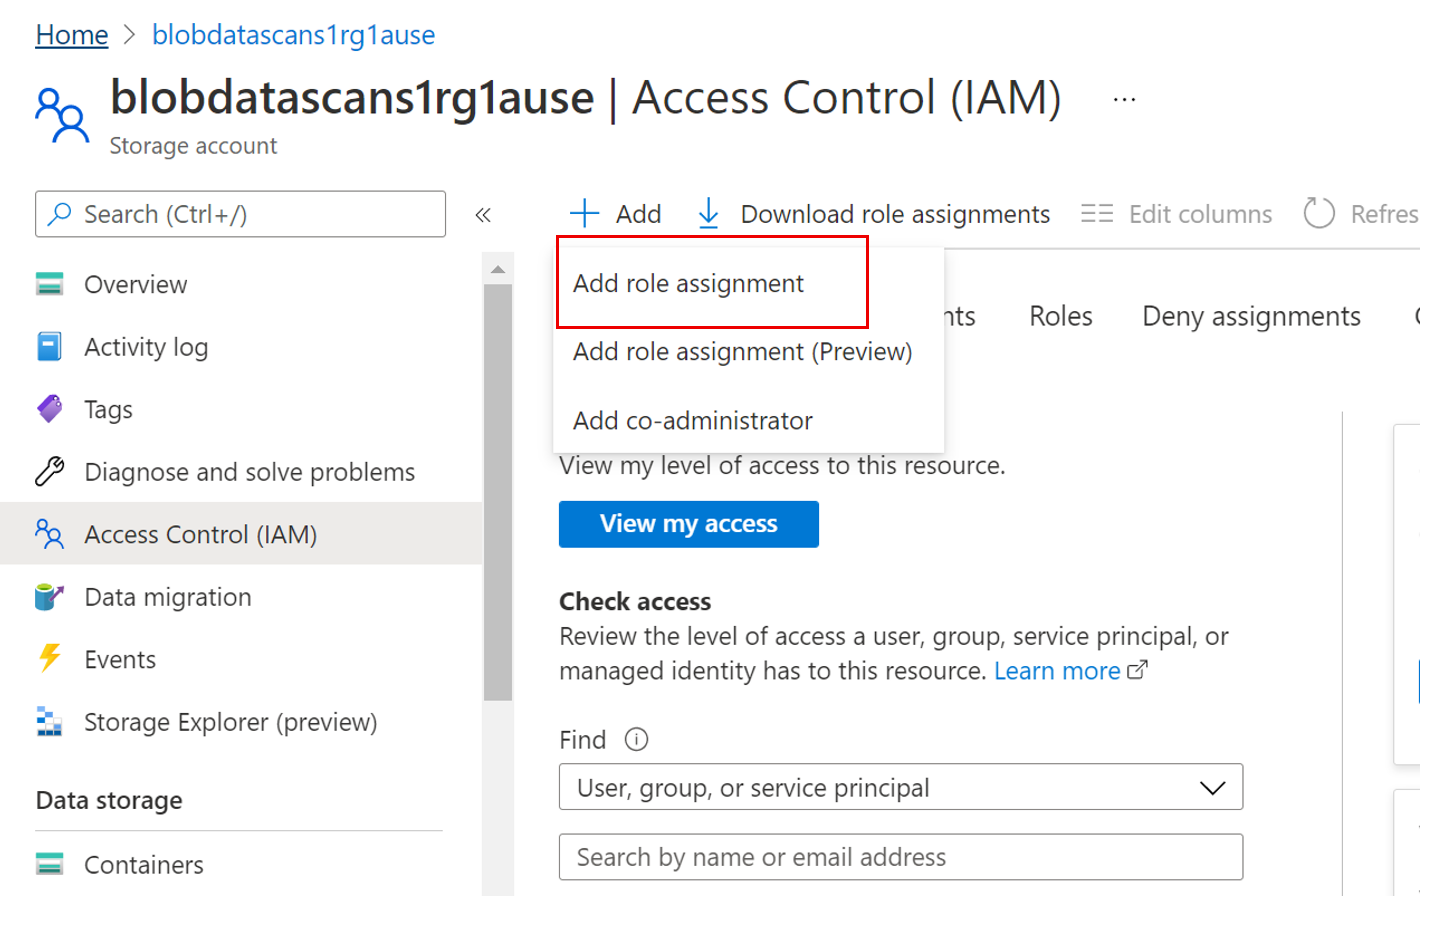 How to: Register and Scan Azure Blob Storage 